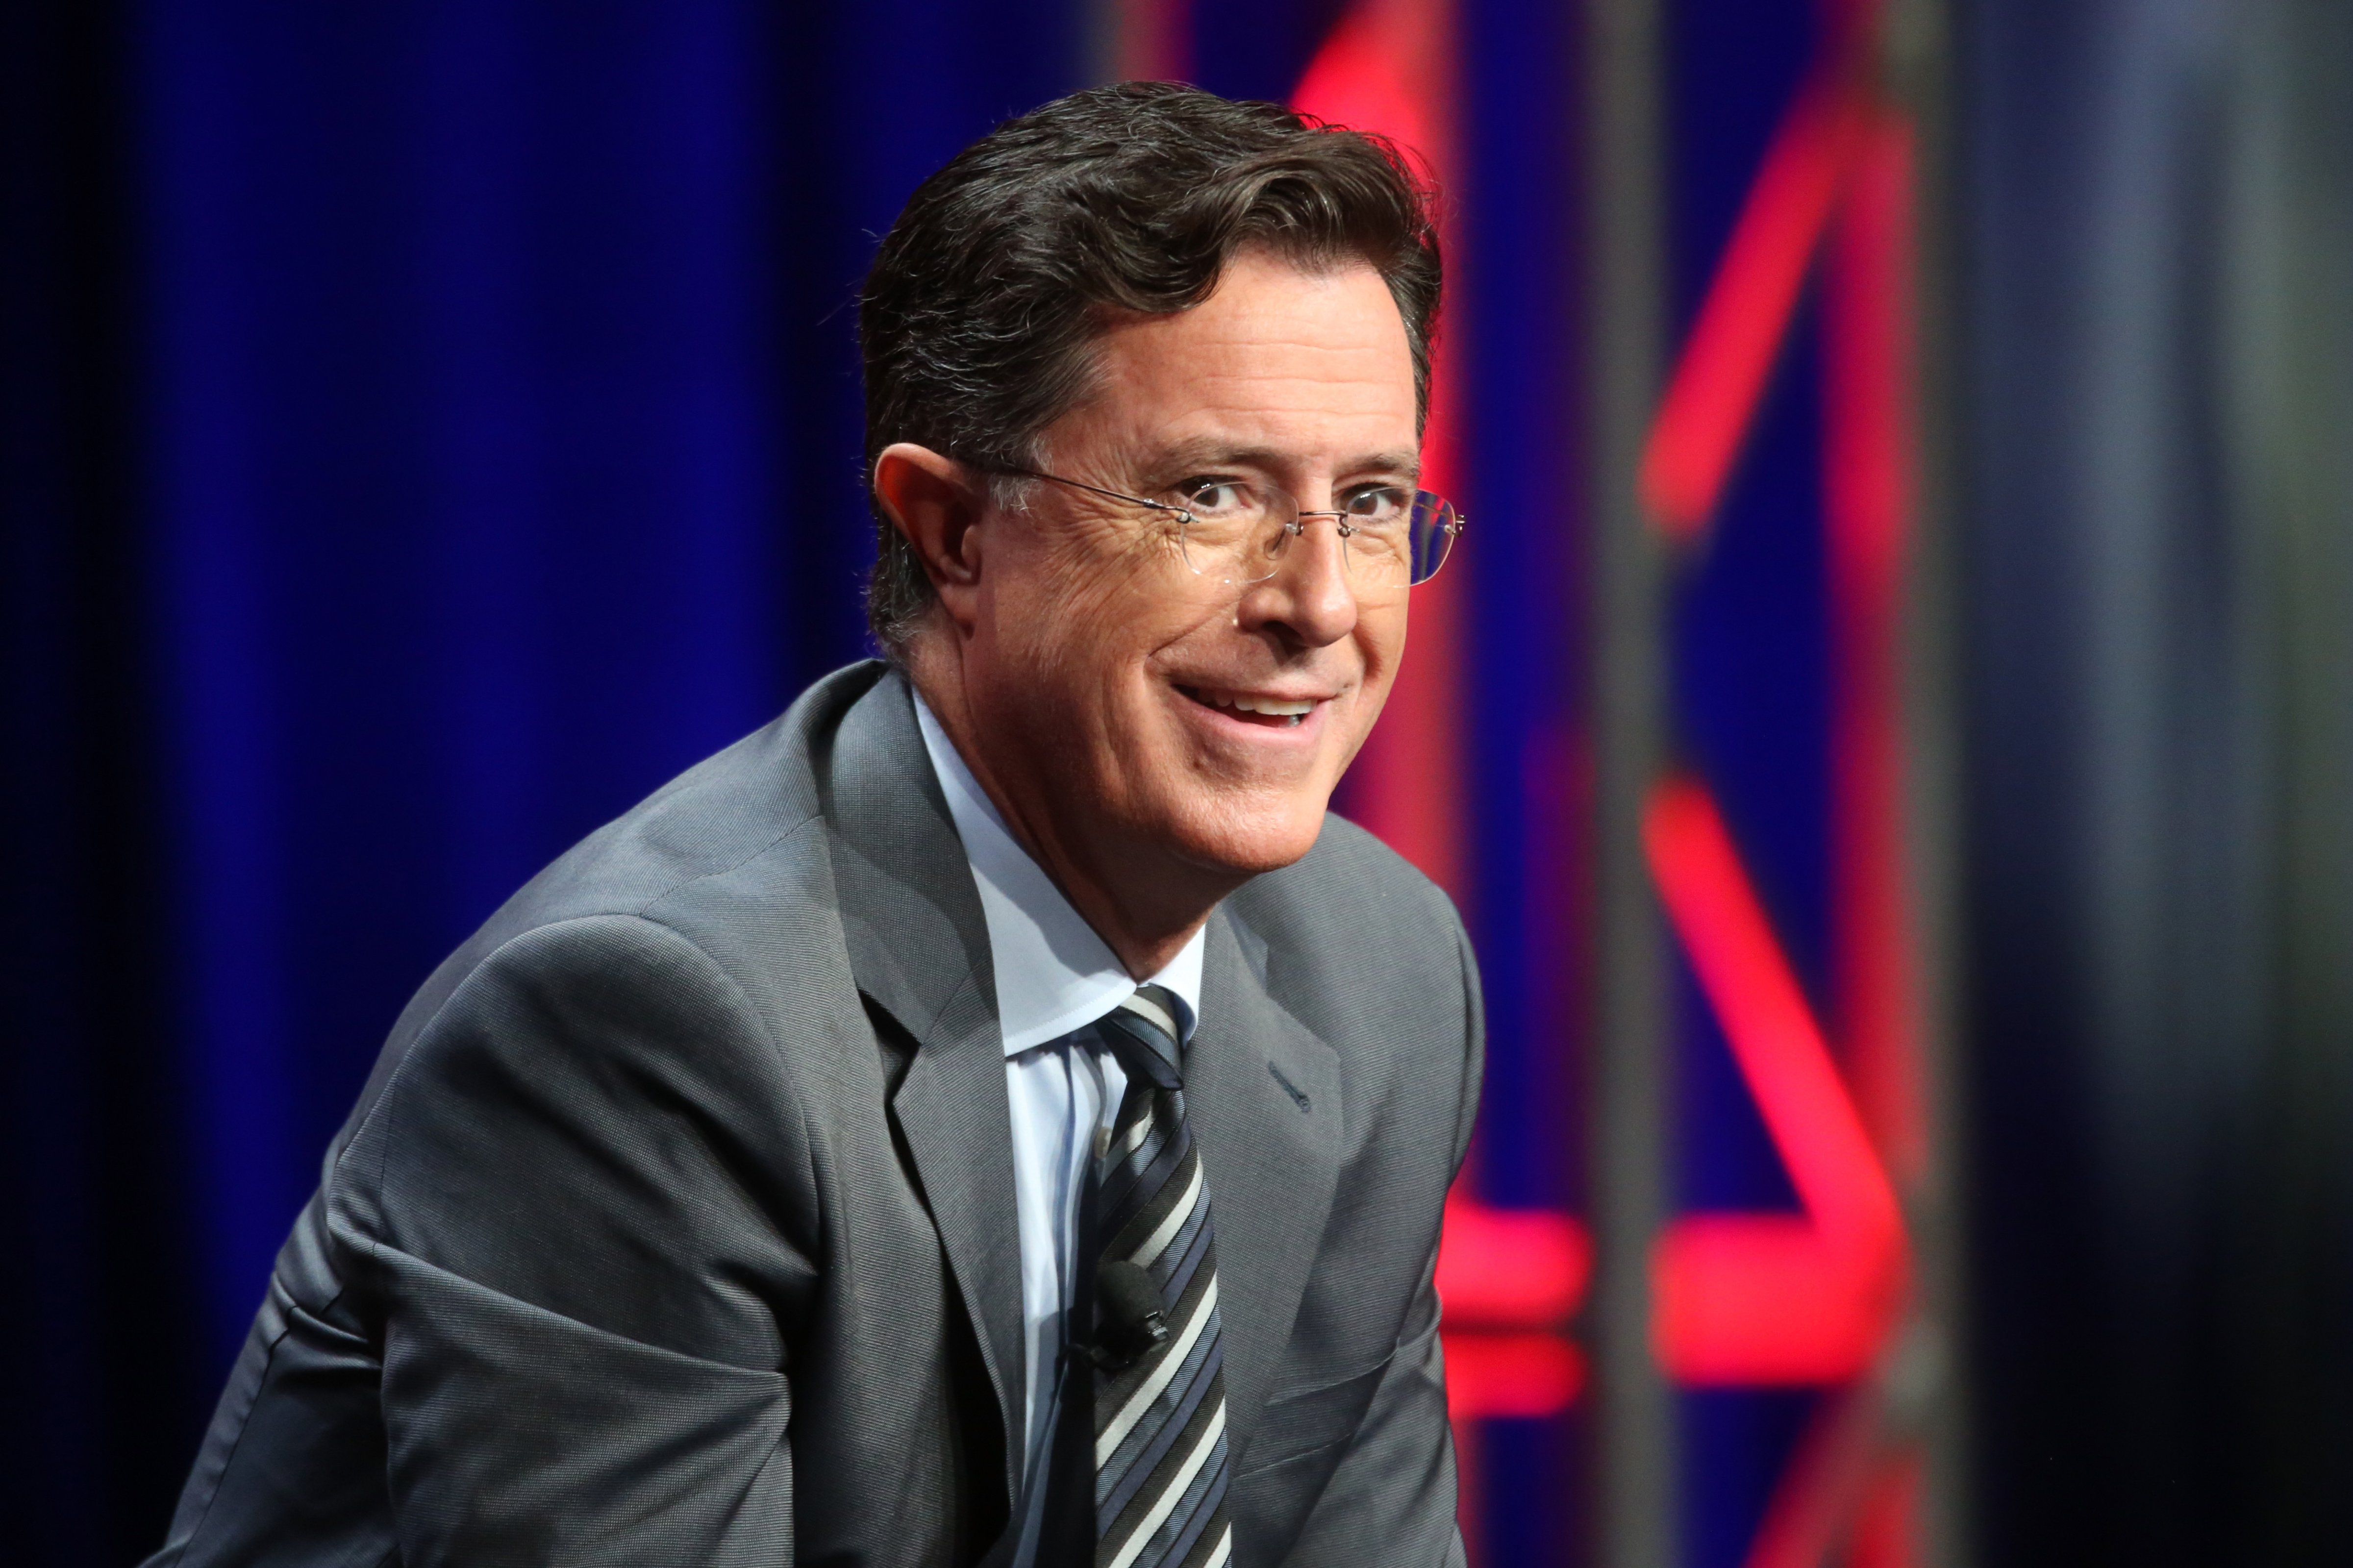 Stephen Colbert onstage during the 'The Late Show with Stephen Colbert' panel discussion at the CBS portion of the 2015 Summer TCA Tour at The Beverly Hilton Hotel on August 10, 2015 in Beverly Hills, California. (Frederick M. Brown—2015 Getty Images)